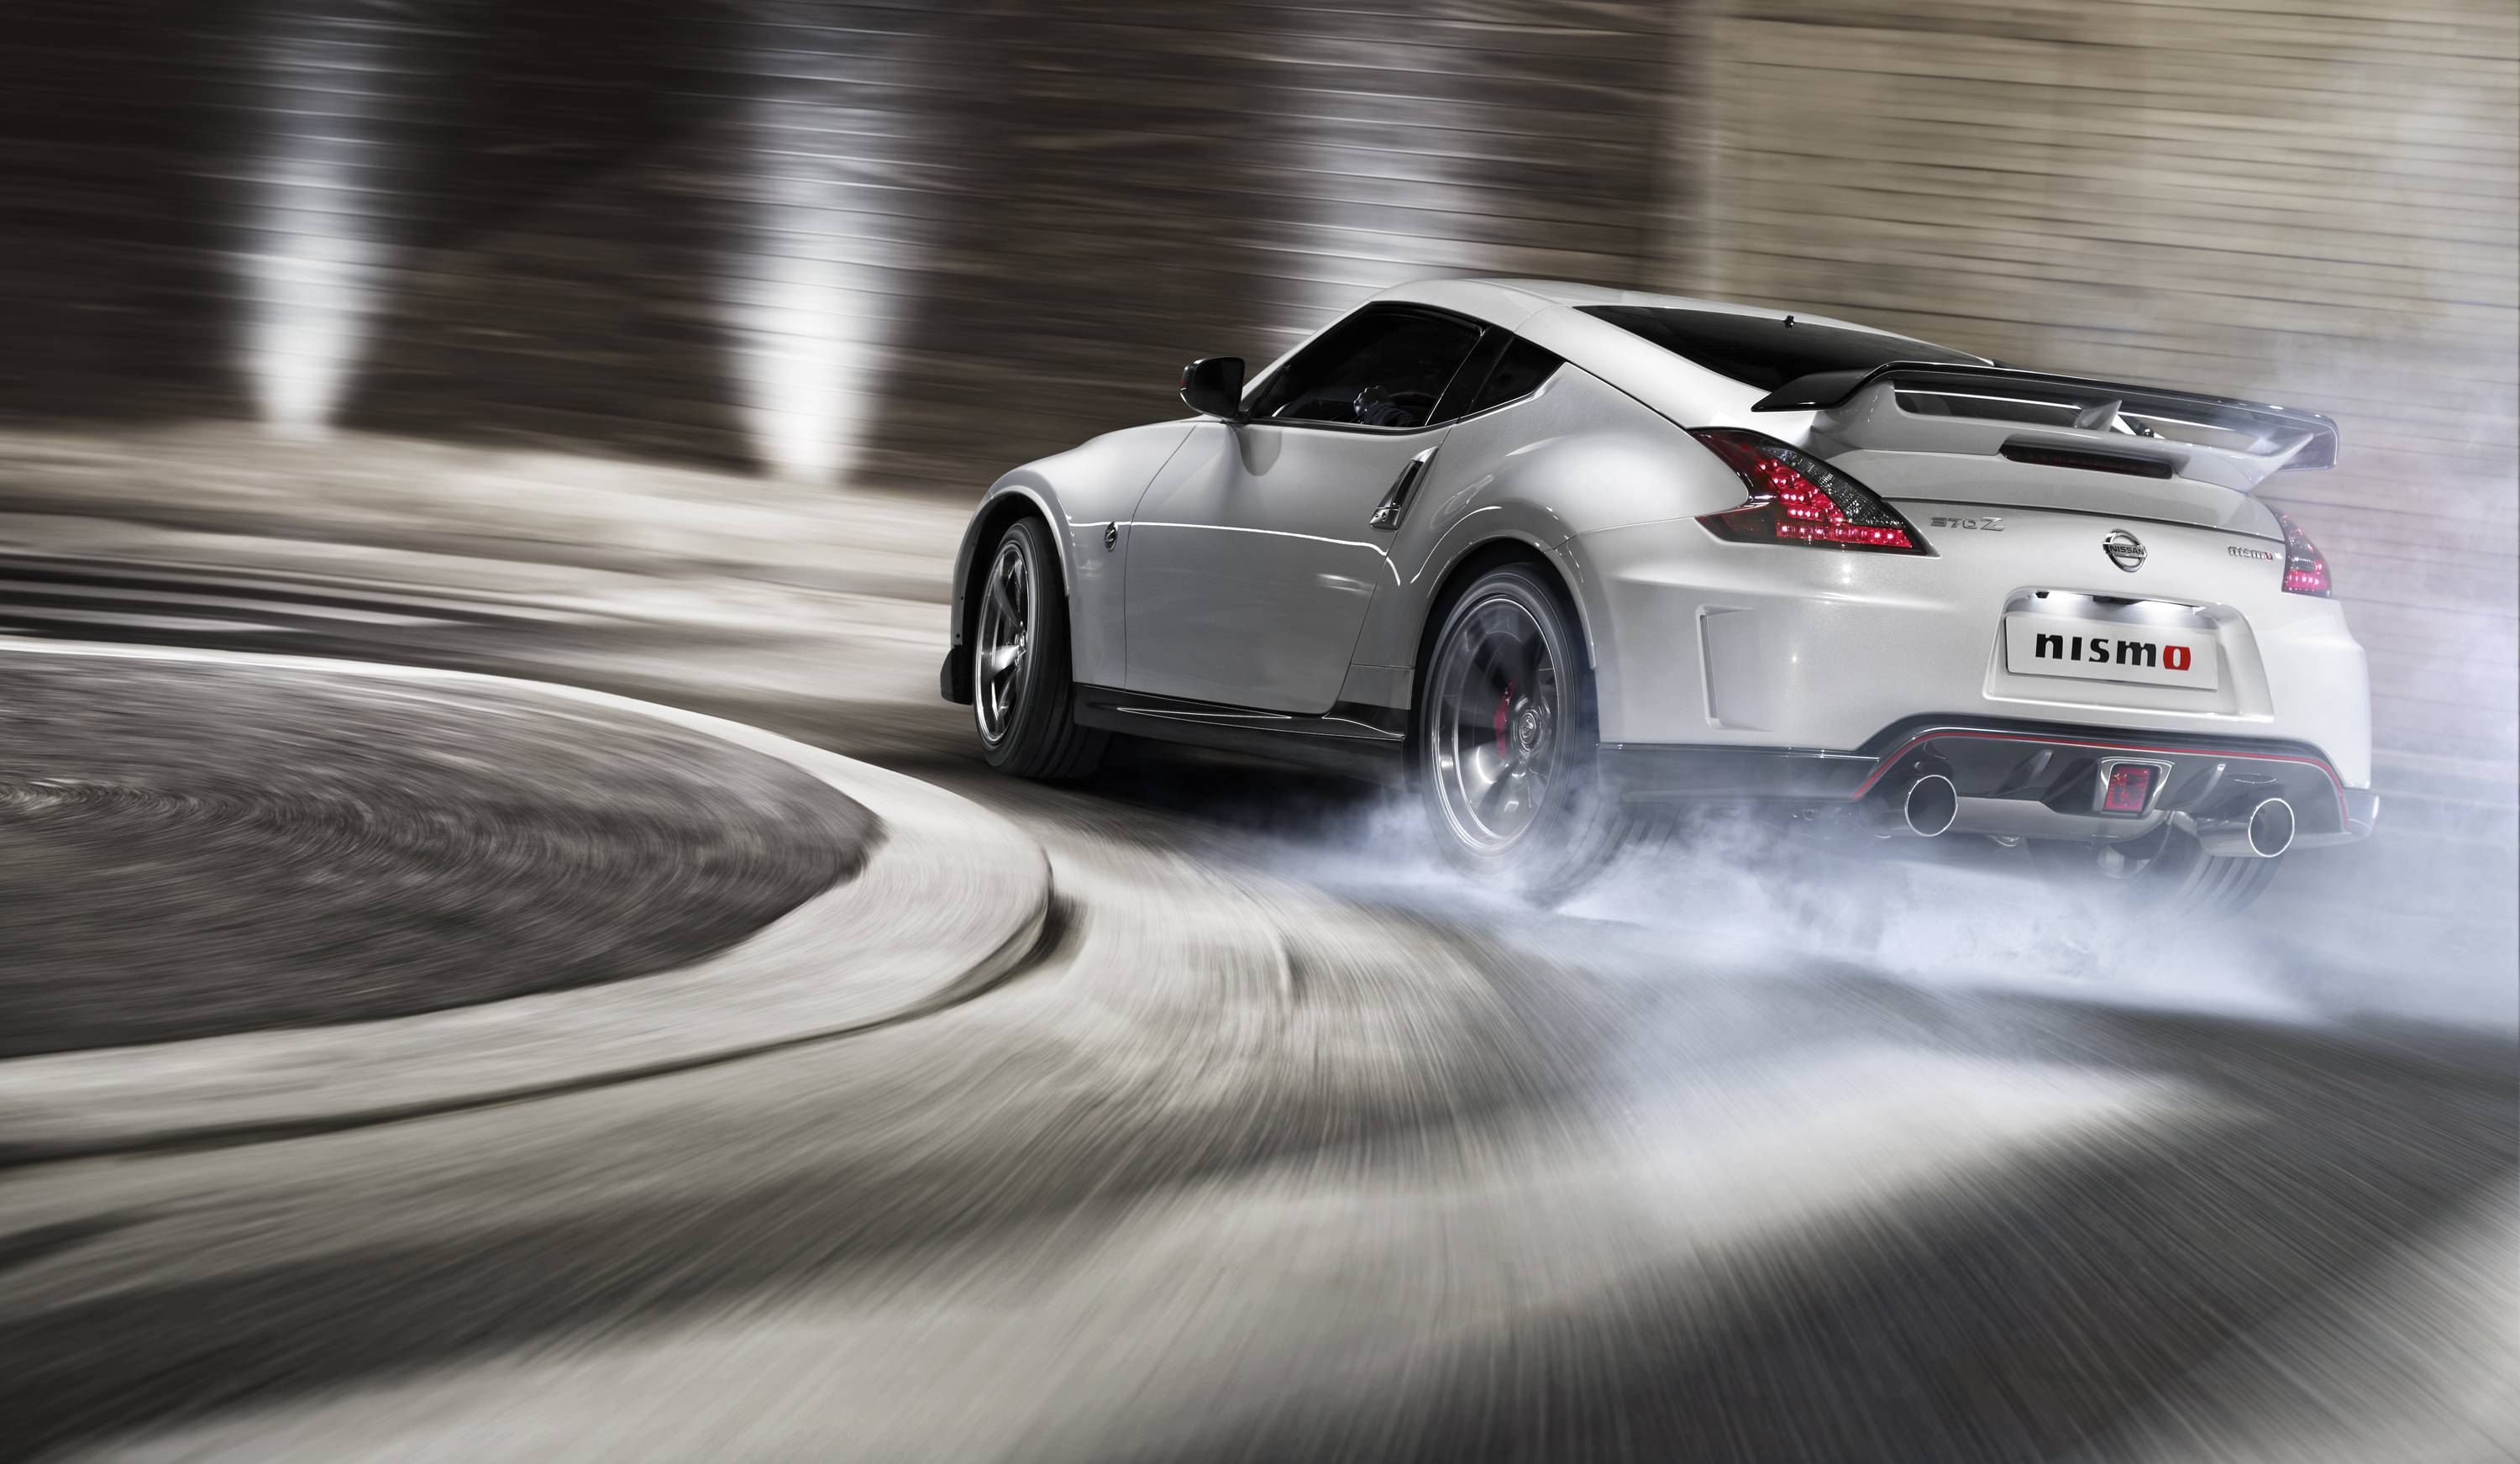 image For > Nissan 370z Nismo Wallpaper